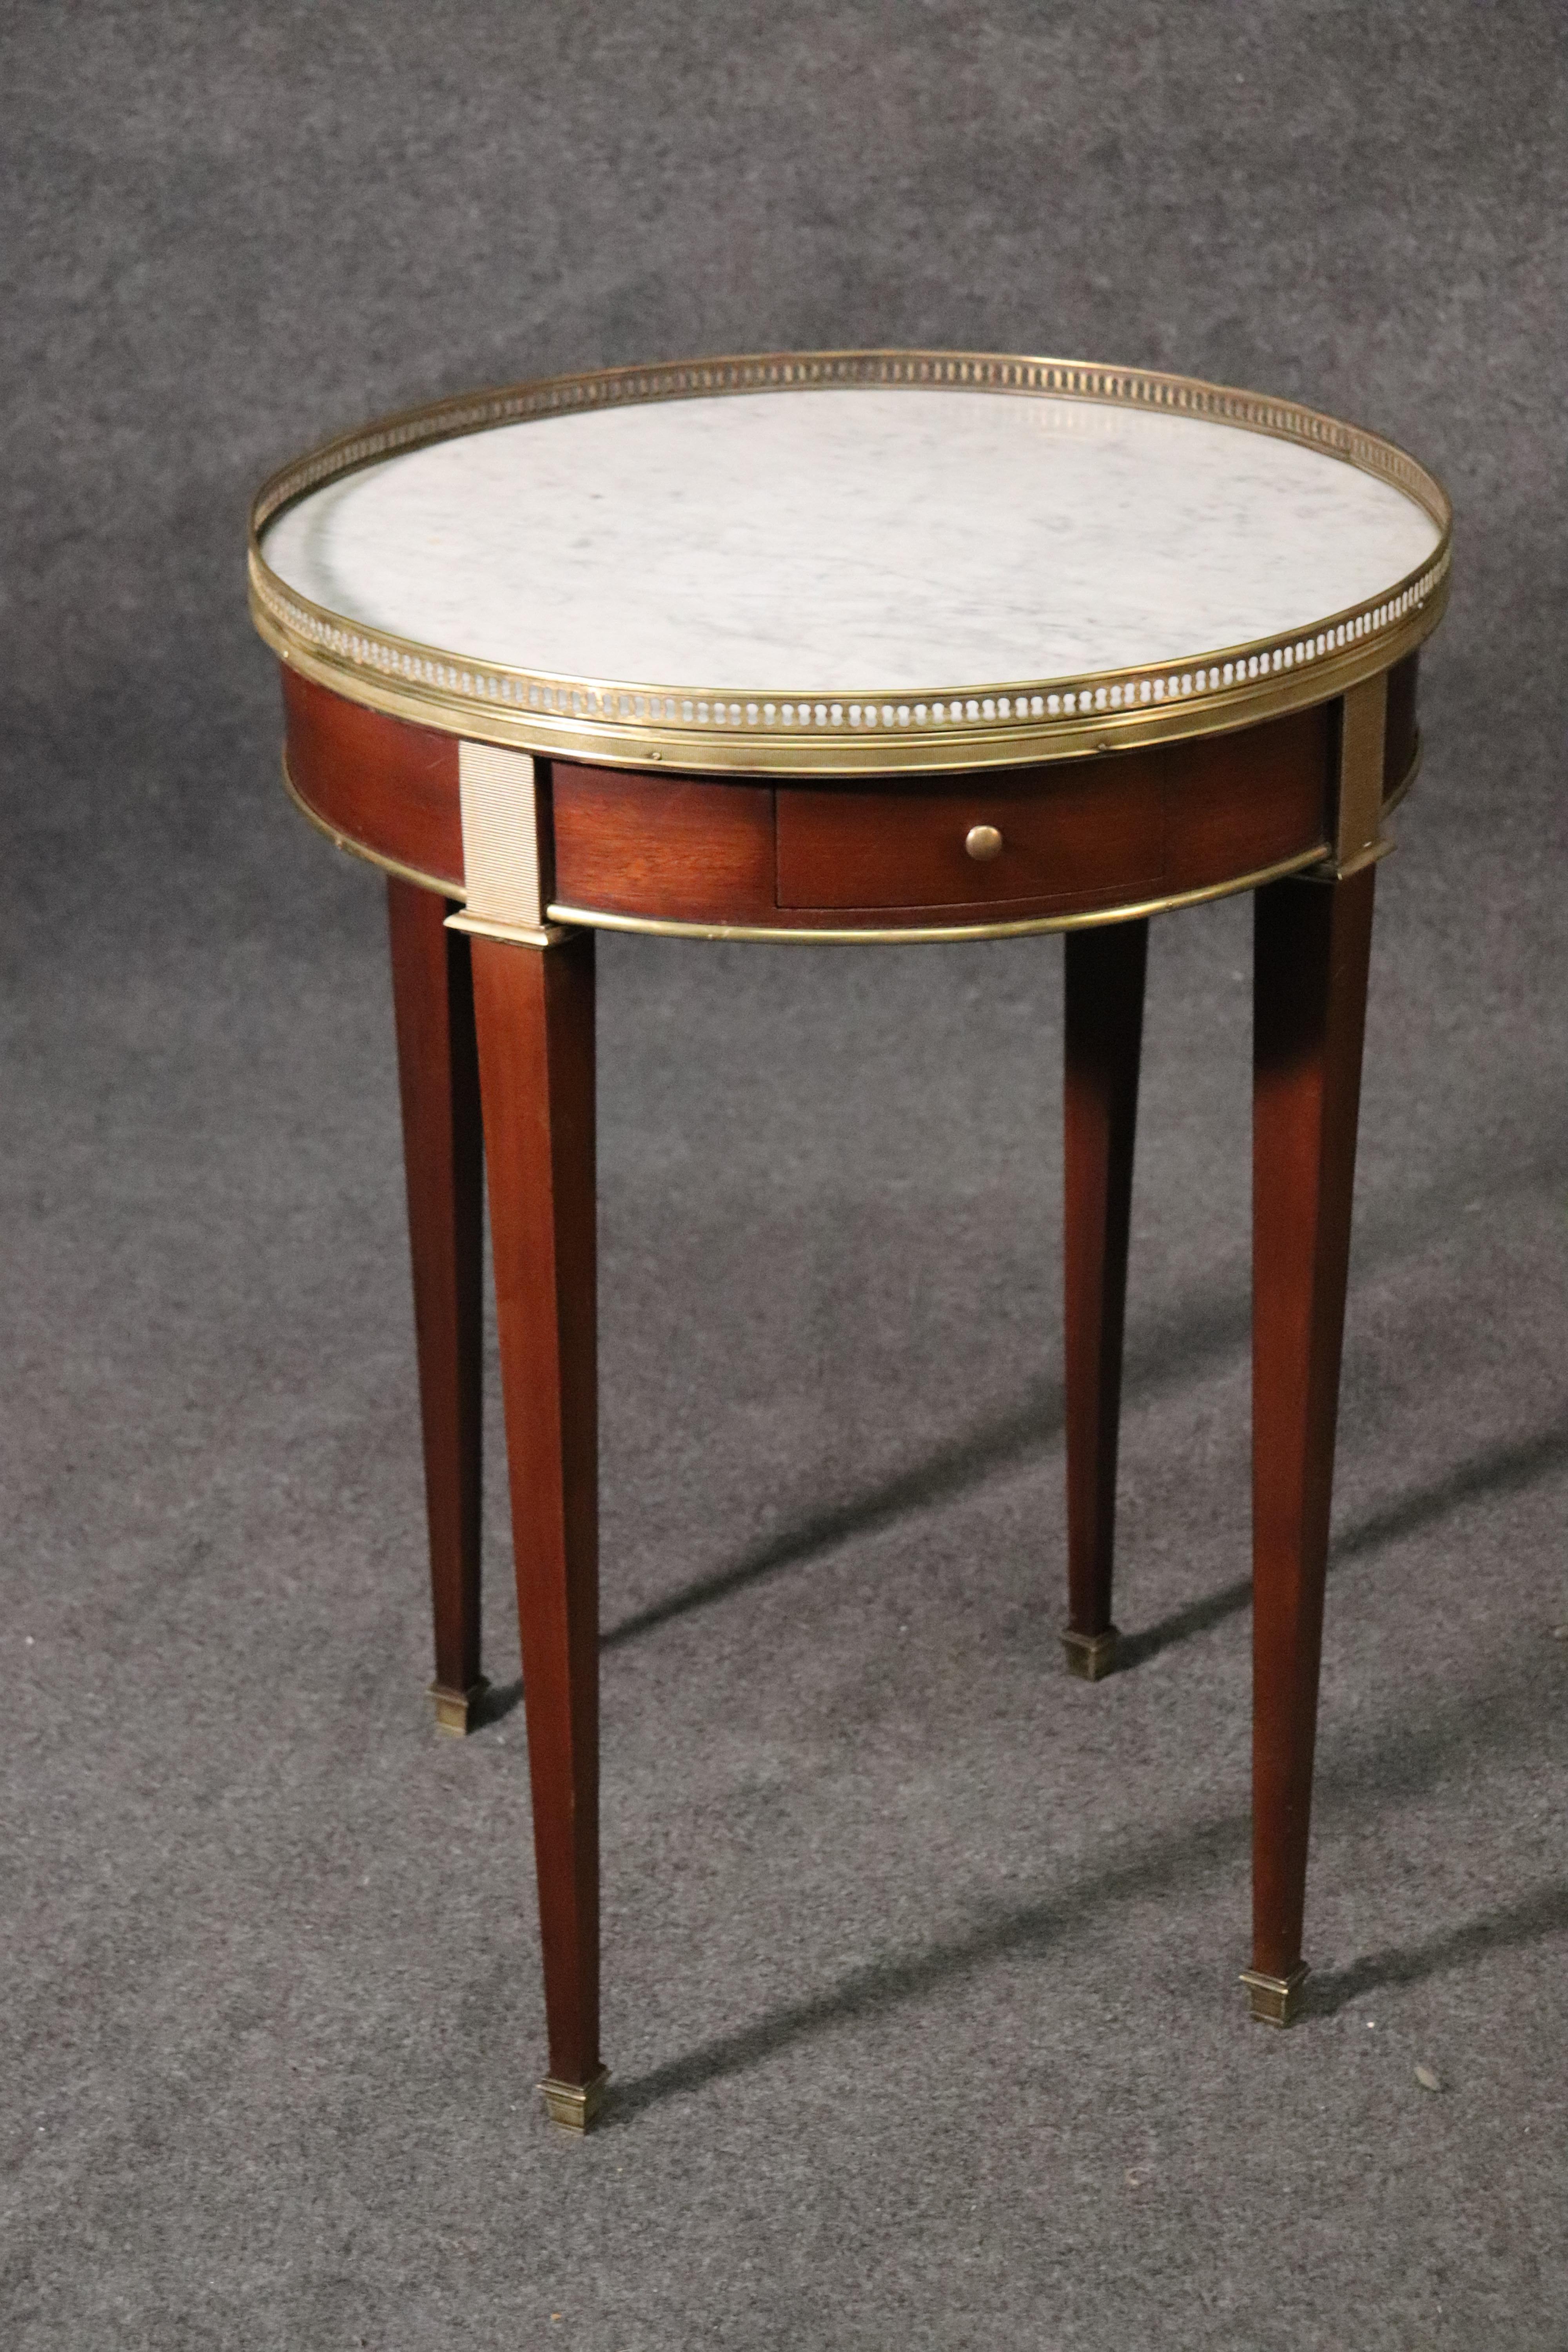 This is a fantastic pair of French geuridons or end tables that are in good condition with white Carrara marble tops and measure 29.25 tall x 22 wide x 22 deep. The tables date to the 1960s era and are fitted with beautiful brass ormolu.